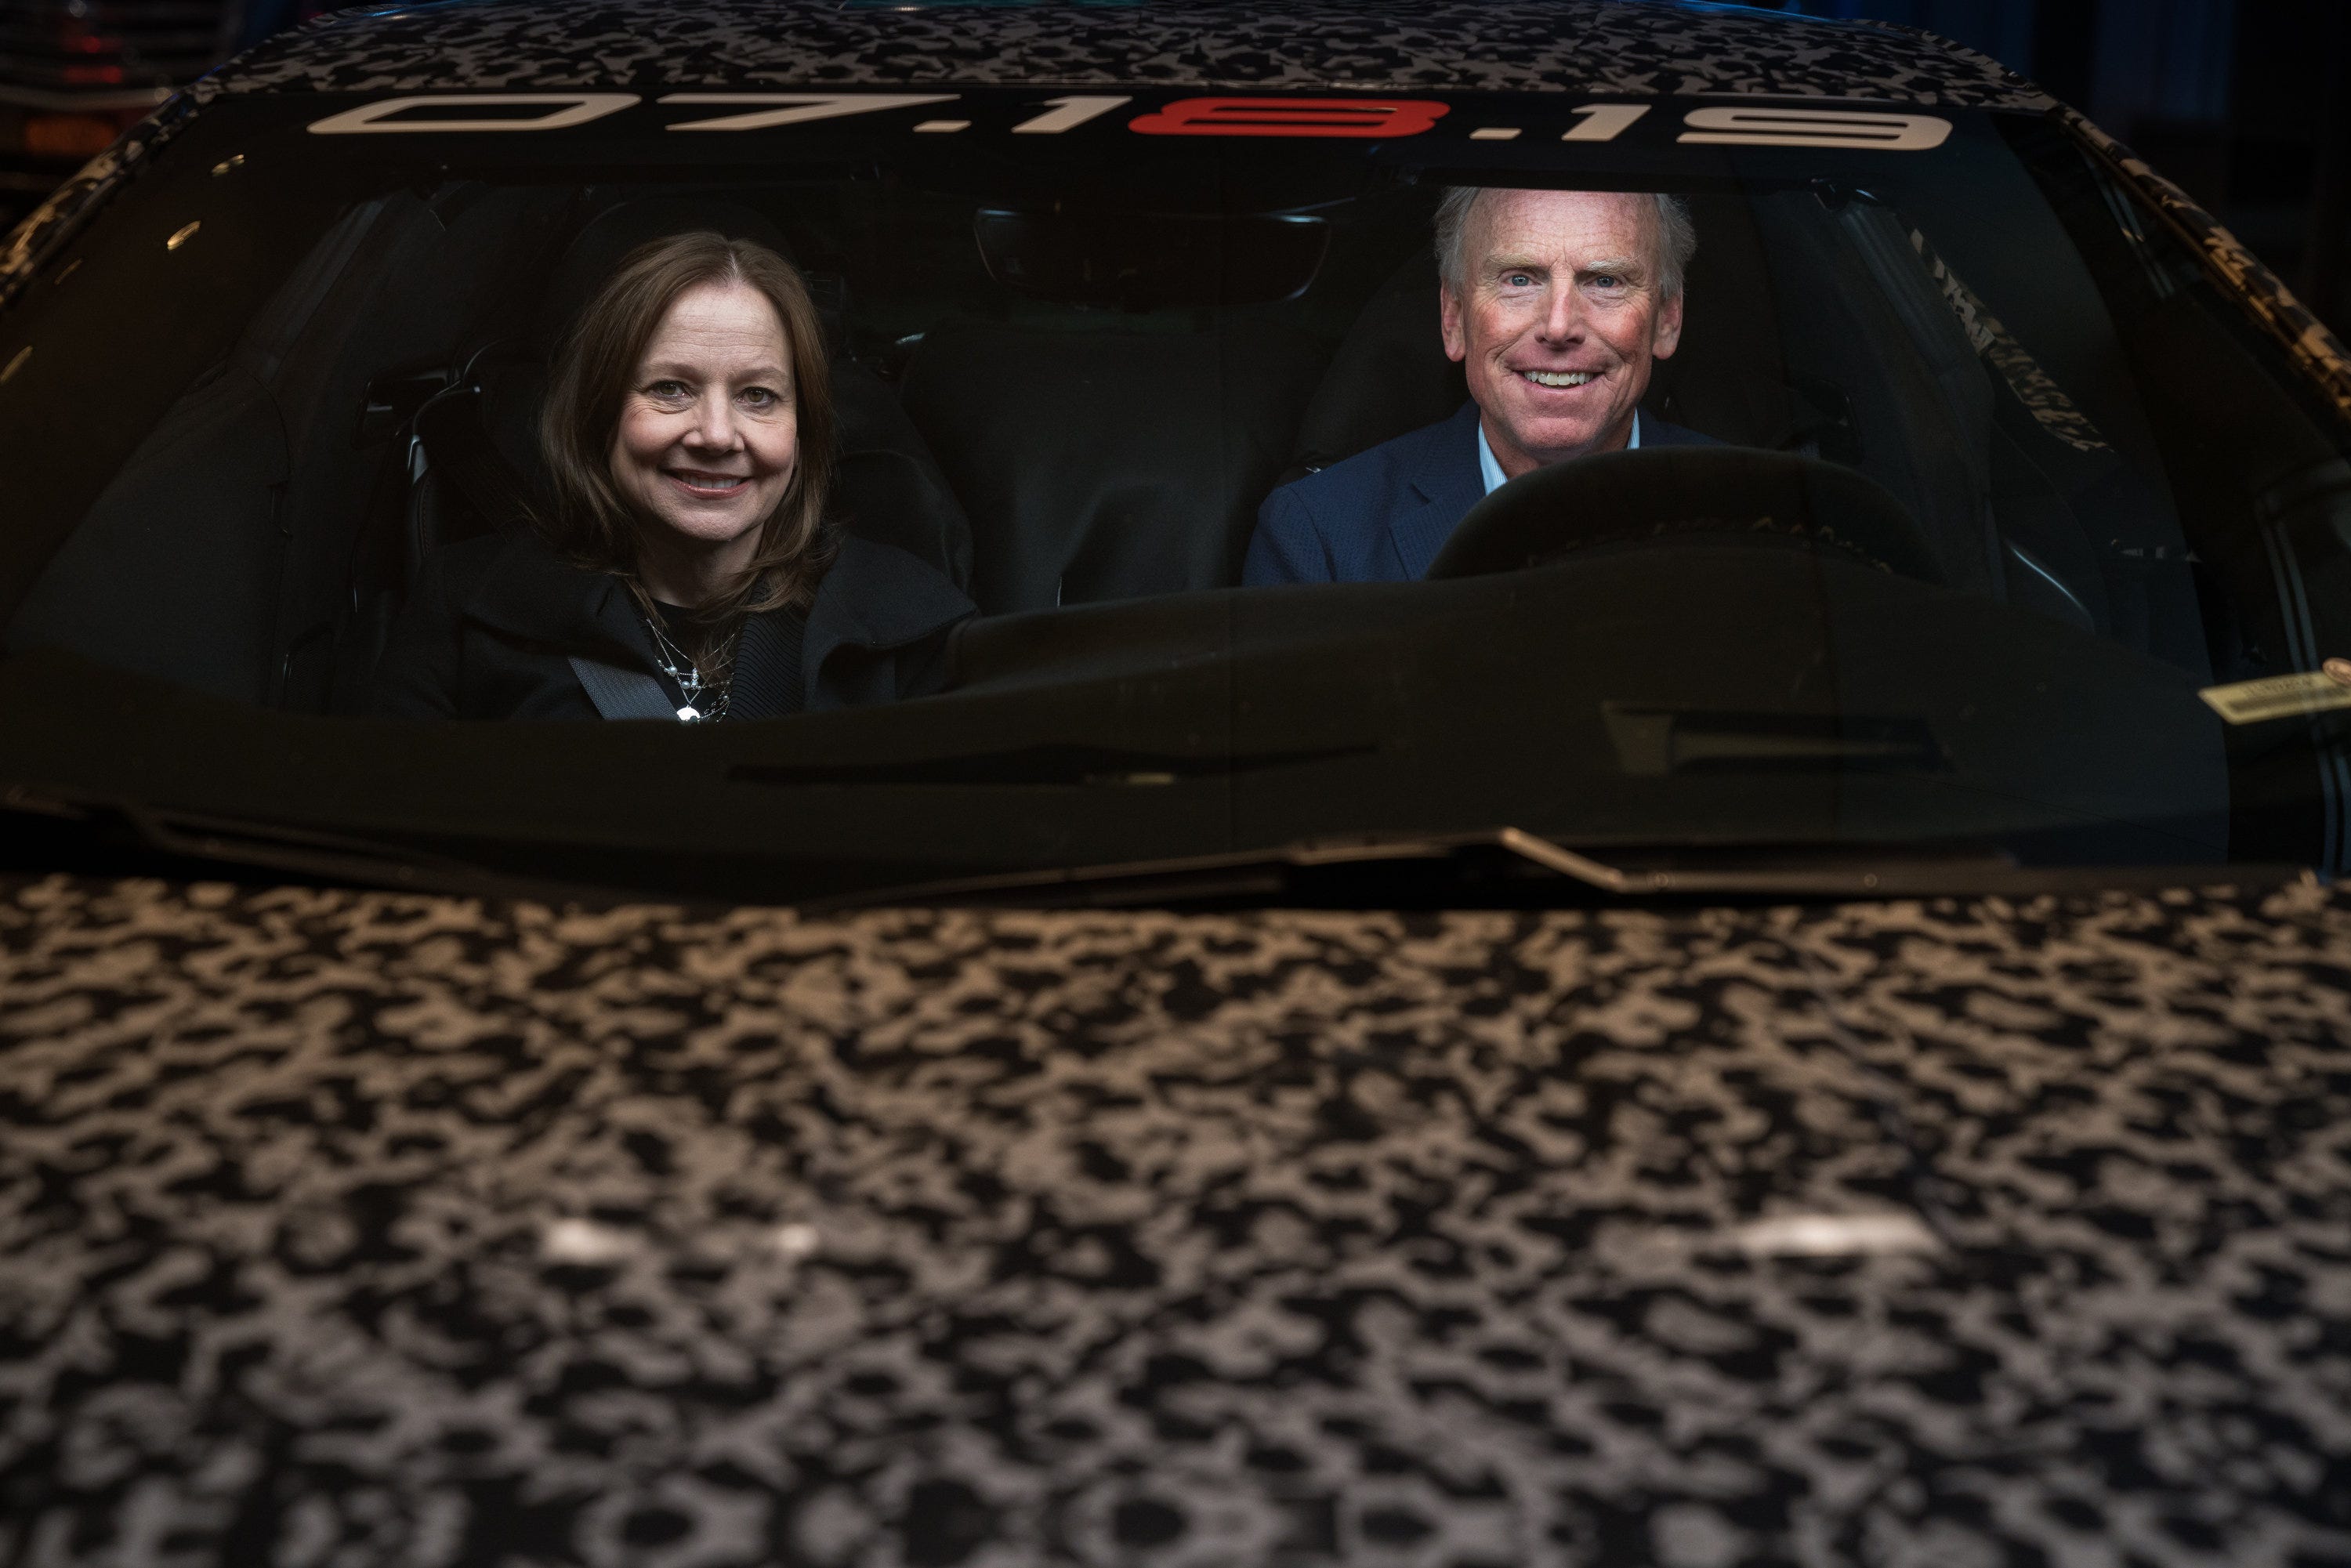 General Motors Chairman and CEO Mary Barra and Corvette Chief Engineer Tadge Juechter inside a camouflaged next generation Chevrolet Corvette.